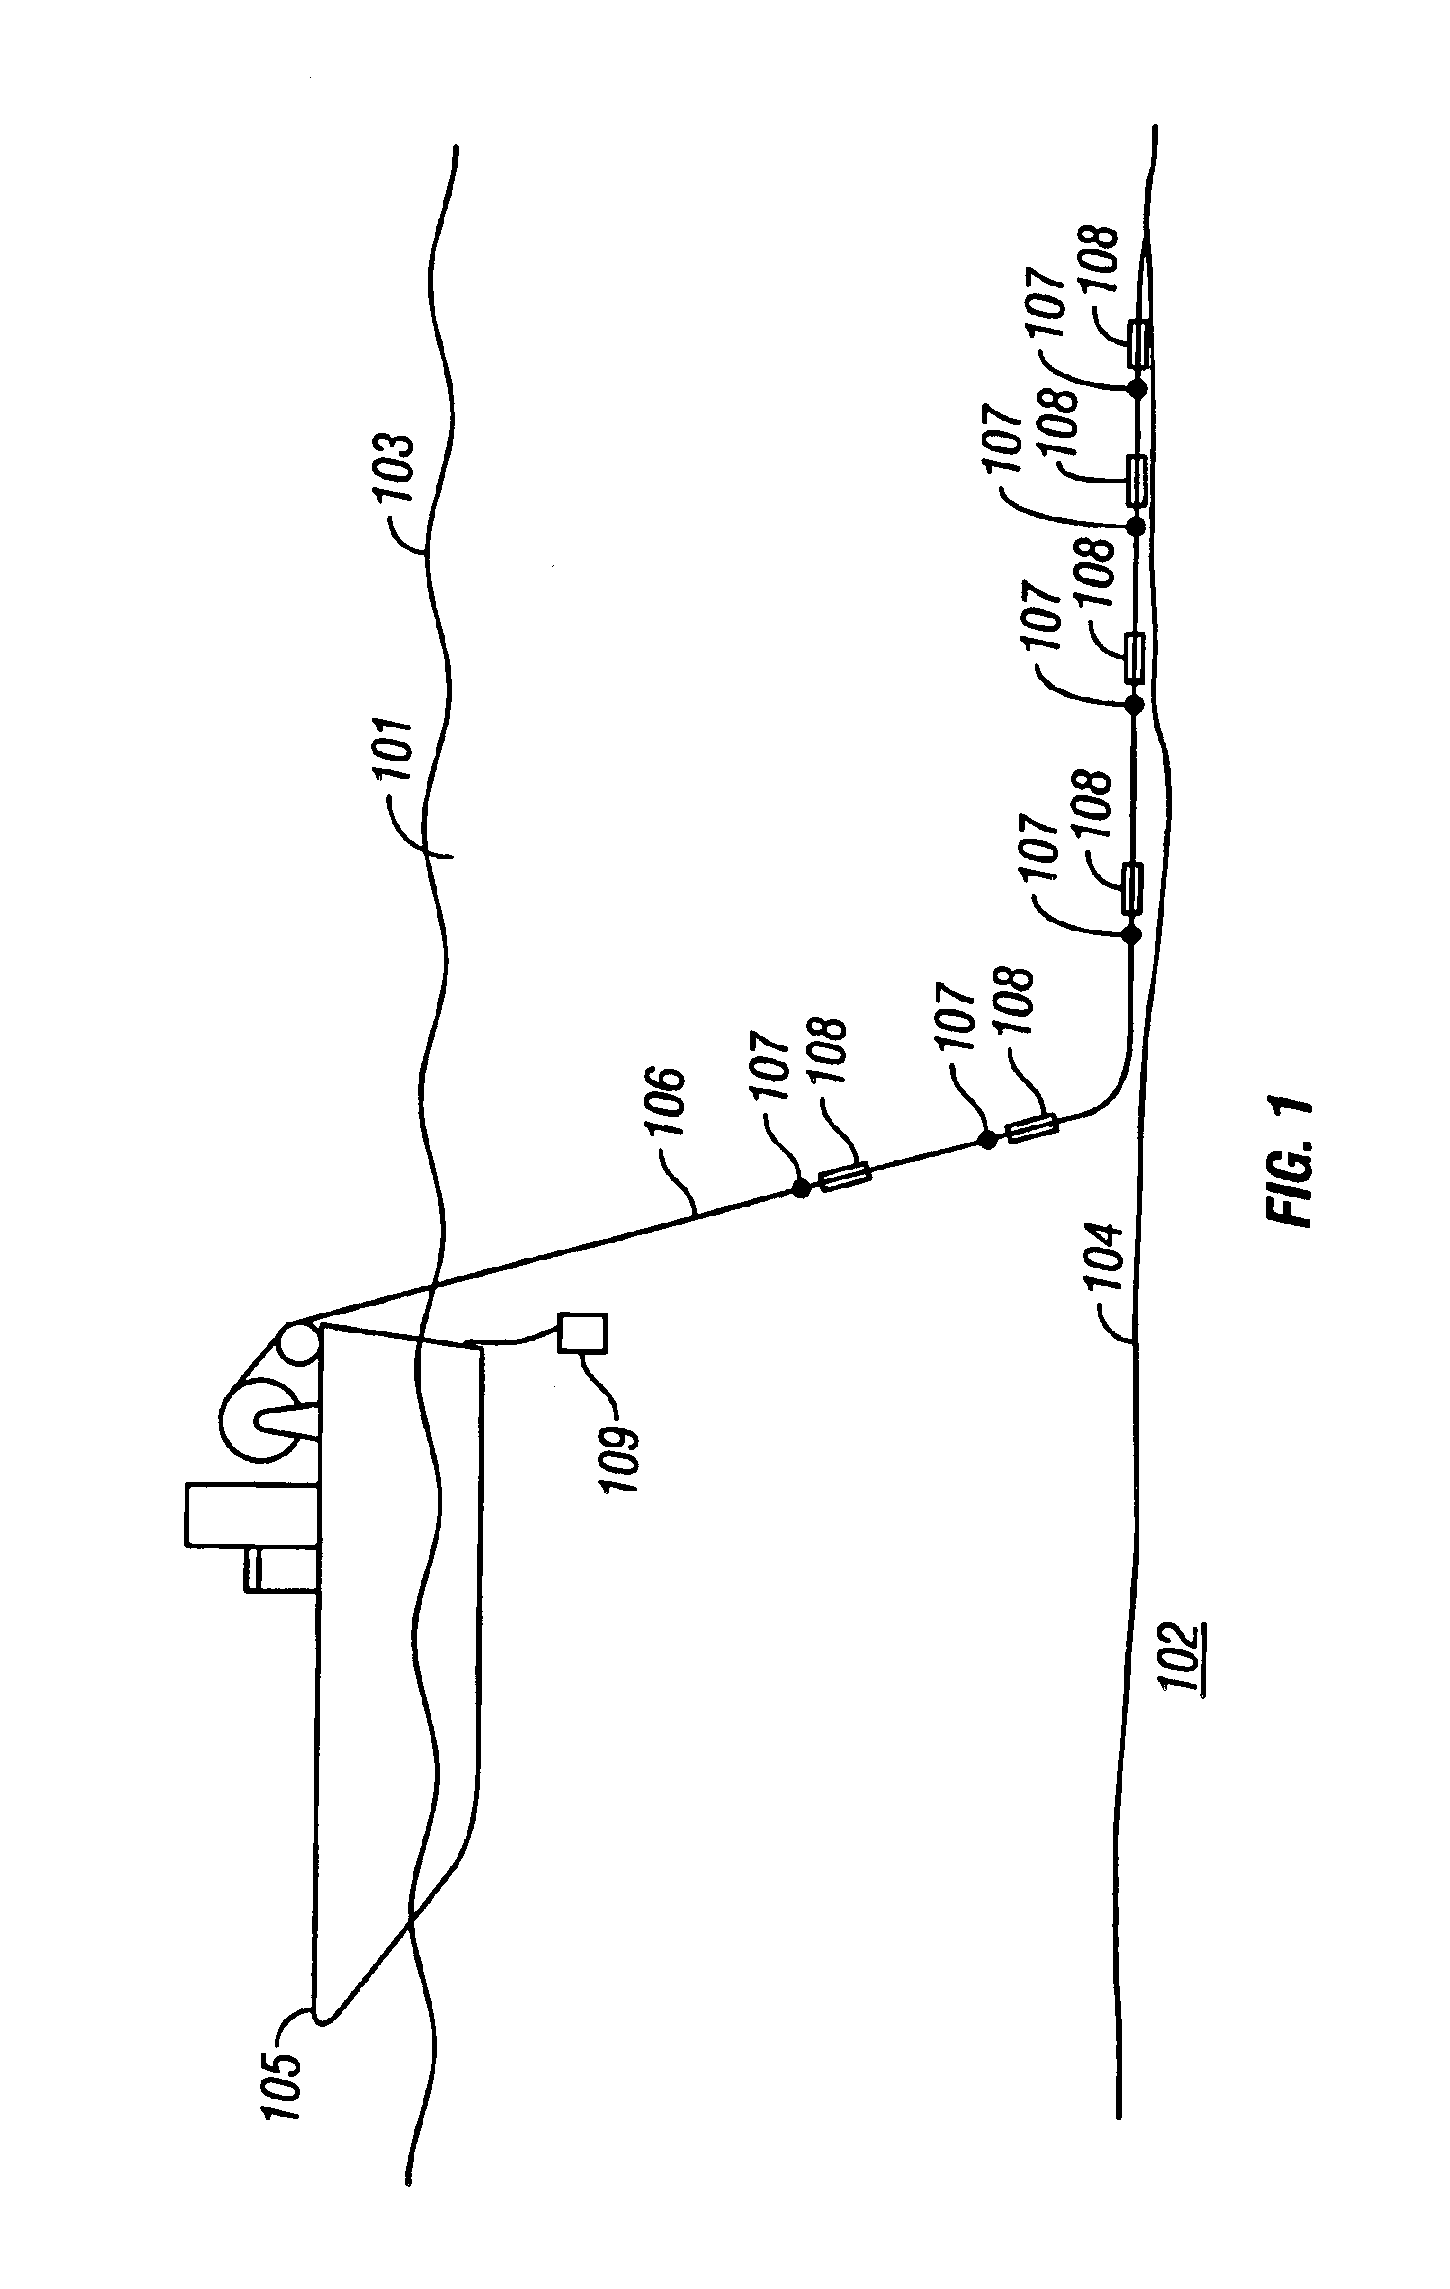 Method for processing dual sensor seismic data to attenuate noise